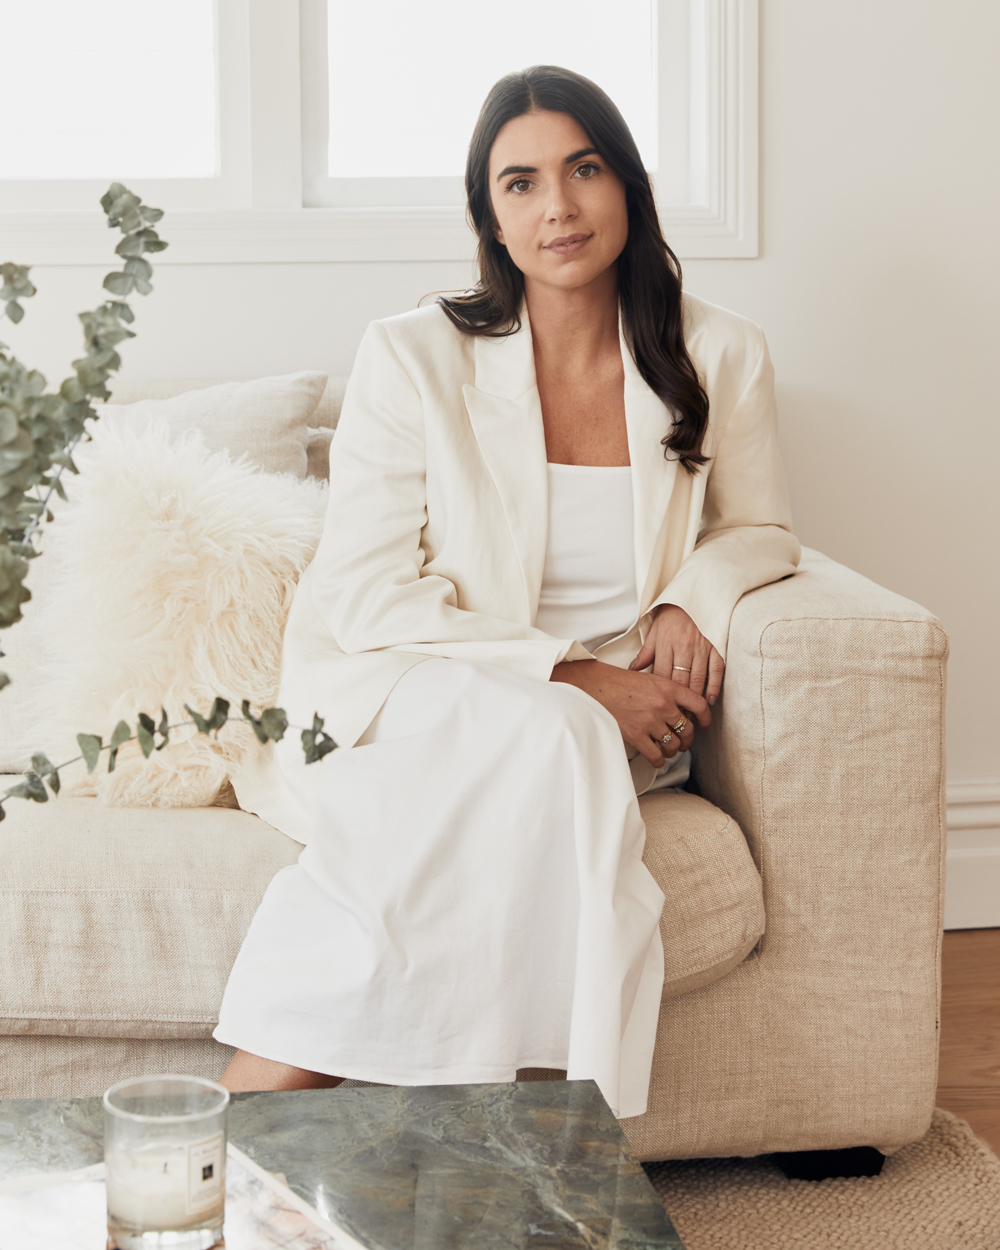 Victoria Harris of The Curve, a finance platform for all women